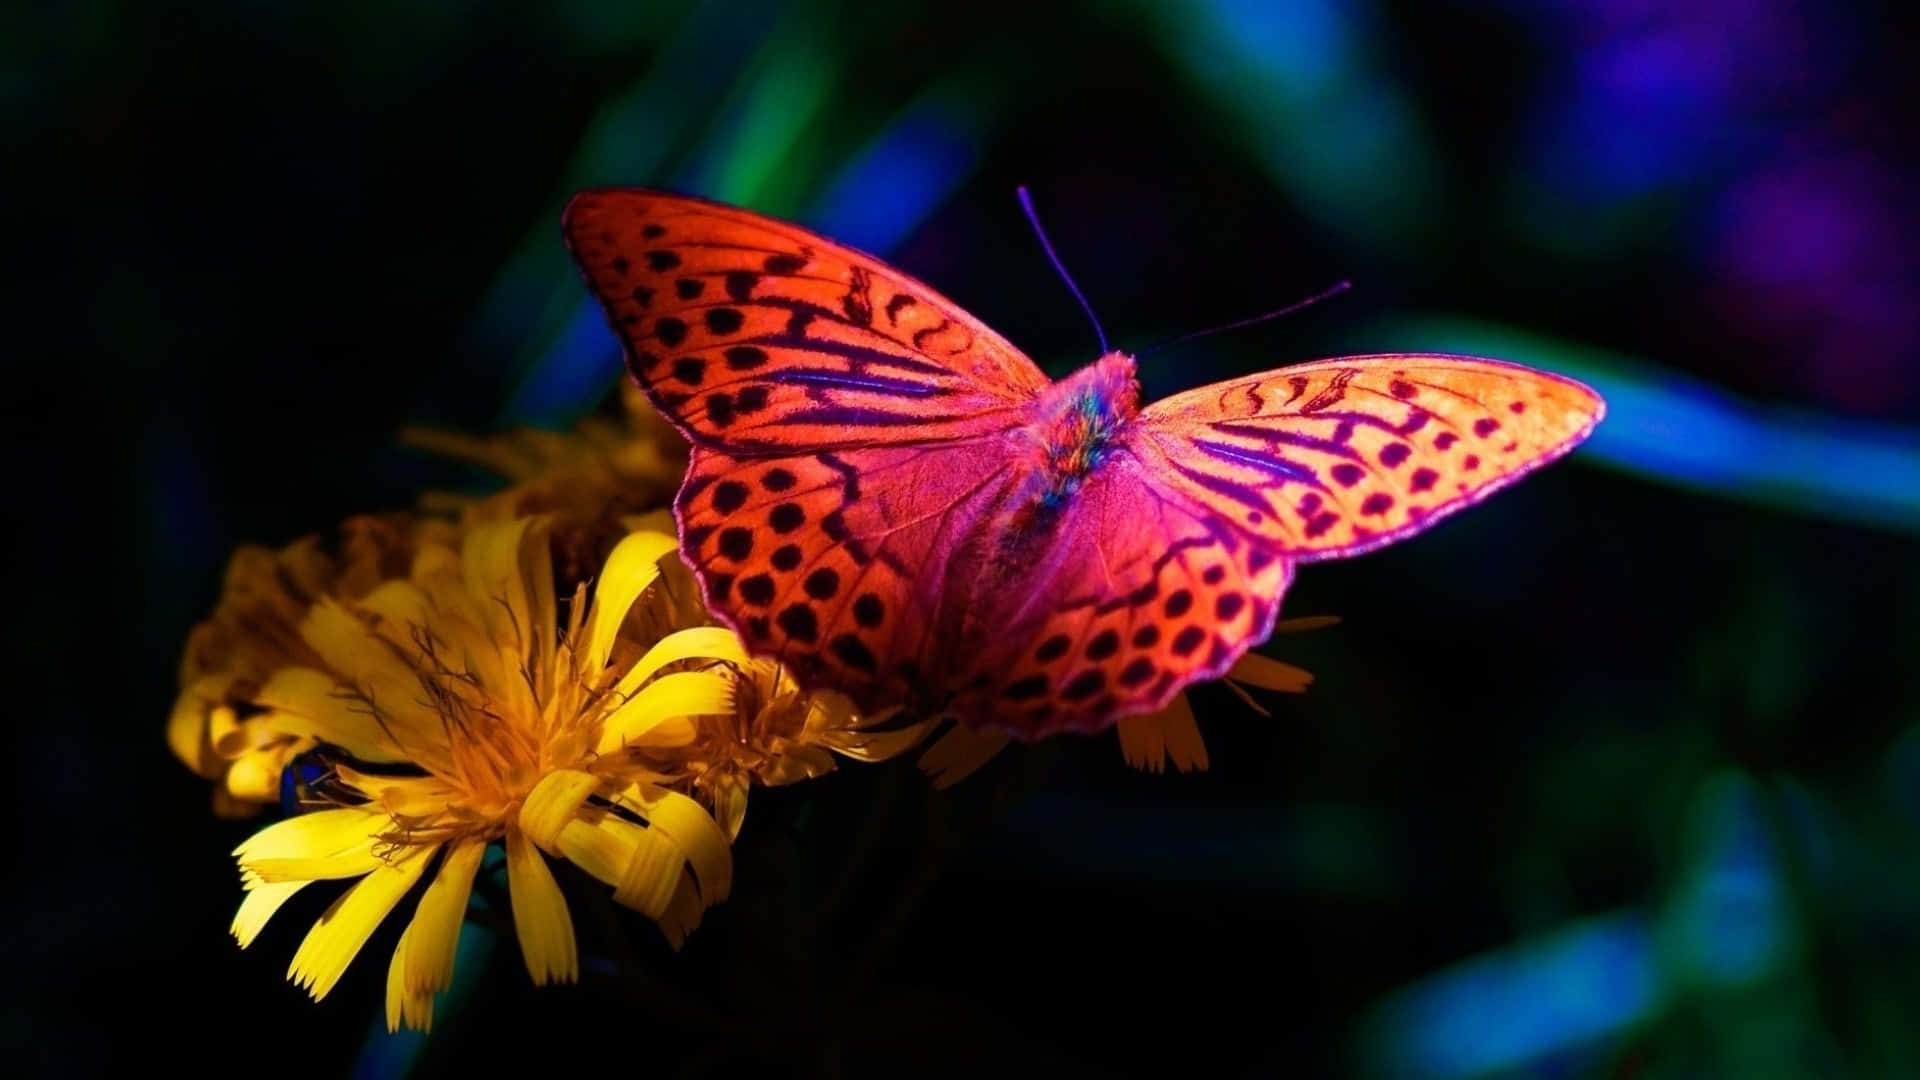 Explore the beauty of the butterfly at Butterfly Zoo! Wallpaper